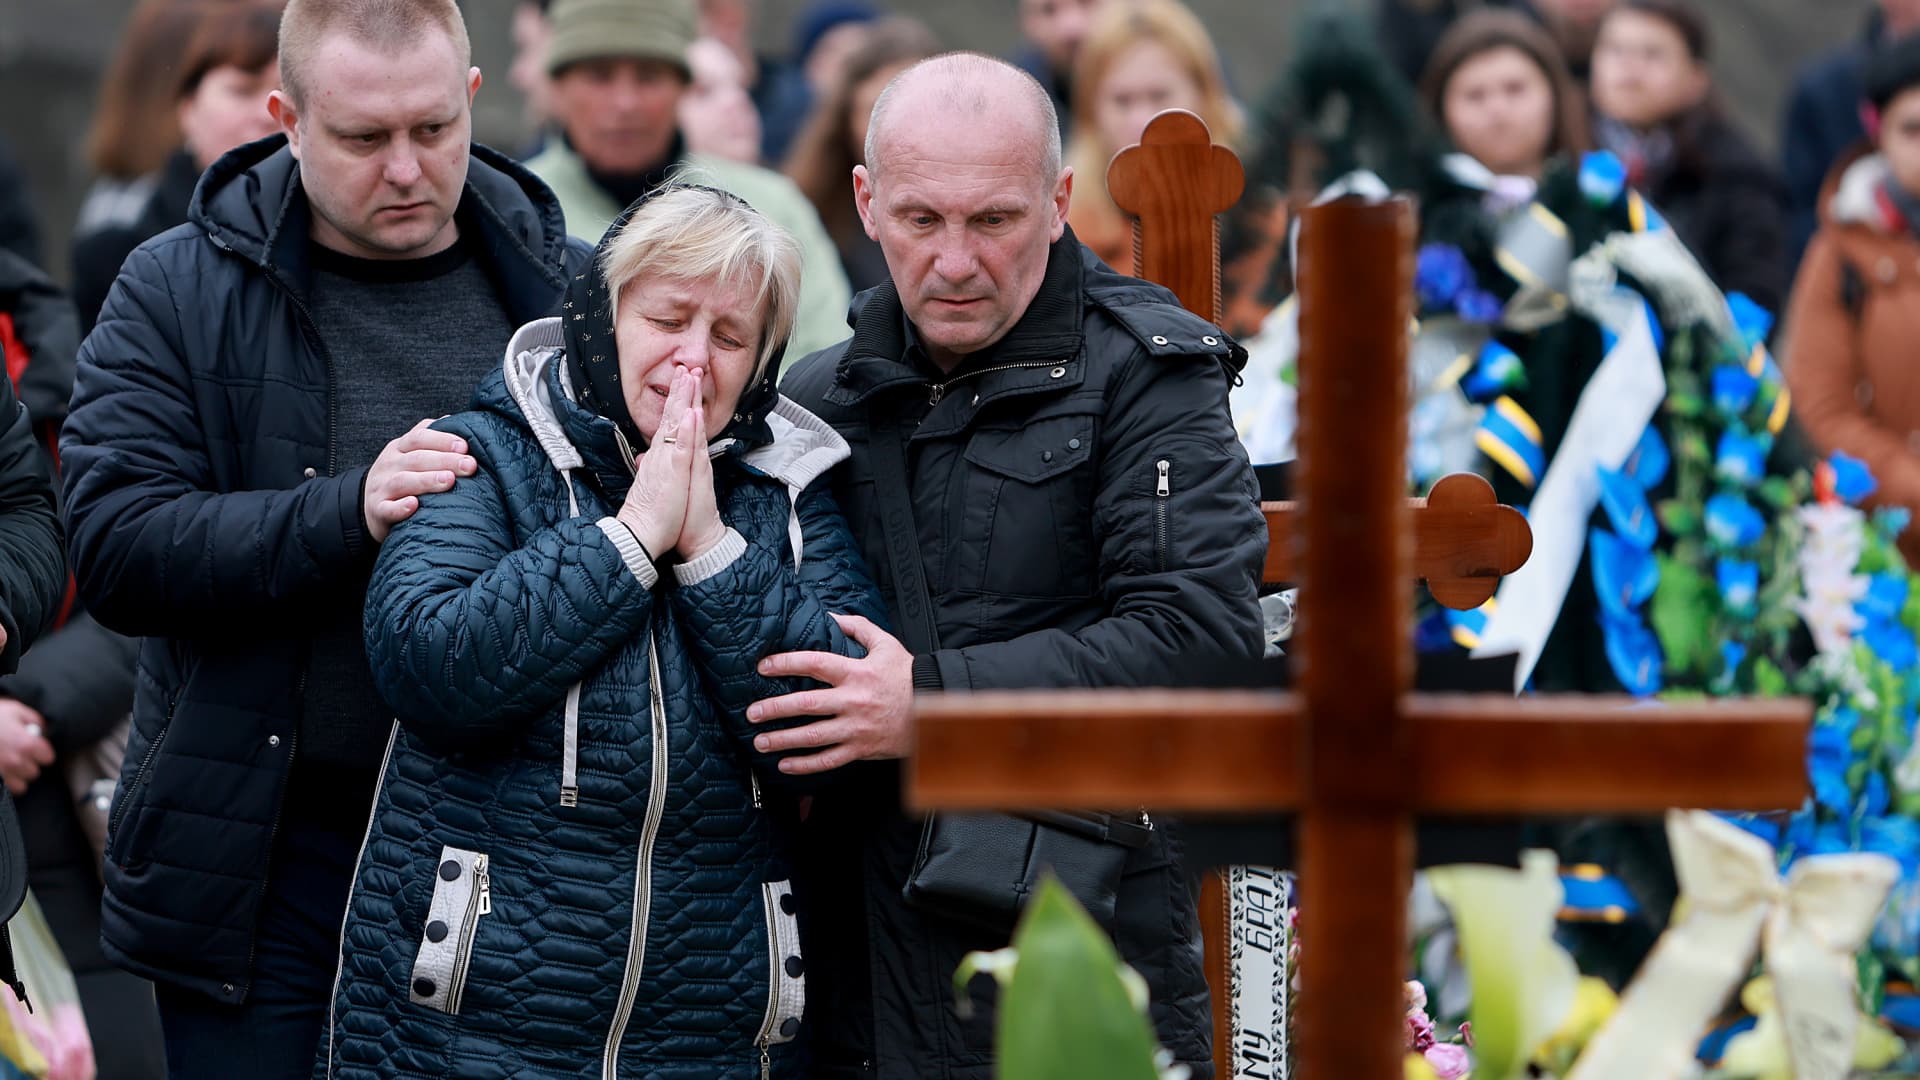 Relatives of Ukrainian military member, Yuriy Oliynyk, become emotional during his burial at the Lychakiv Cemetery on March 31, 2022 in Lviv, Ukraine.